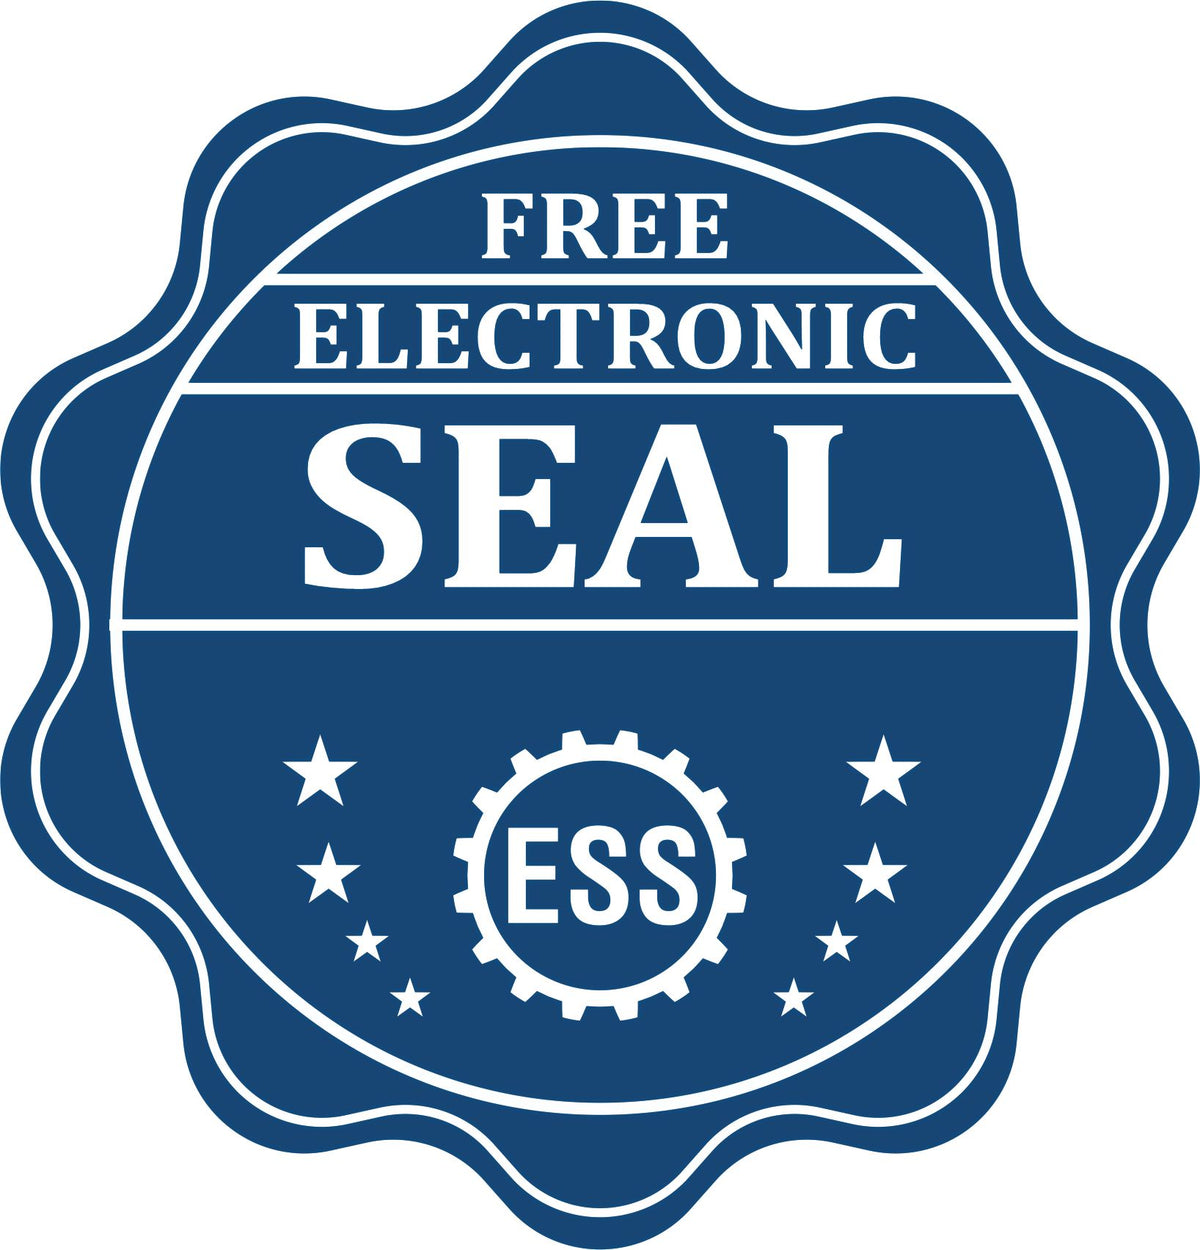 A badge showing a free electronic seal for the MaxLight Premium Pre-Inked New Mexico State Seal Notarial Stamp with stars and the ESS gear on the emblem.